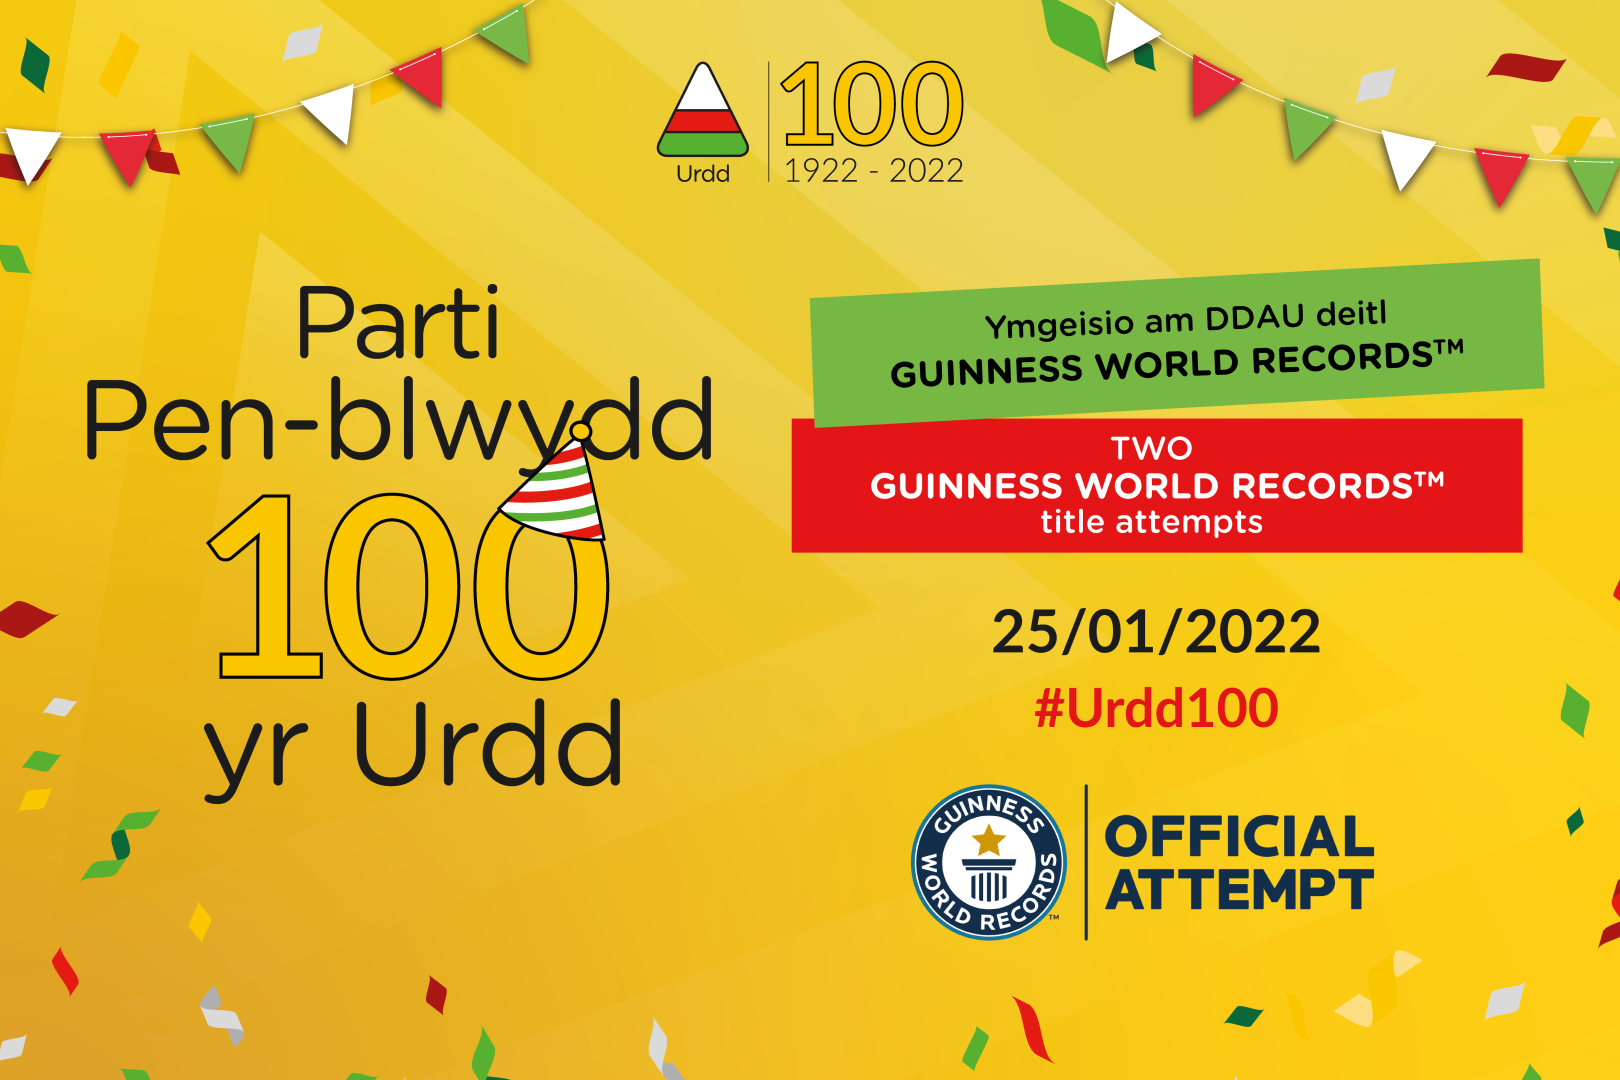 Those looking to join the birthday party and world record attempts are invited to register on the charity's website.